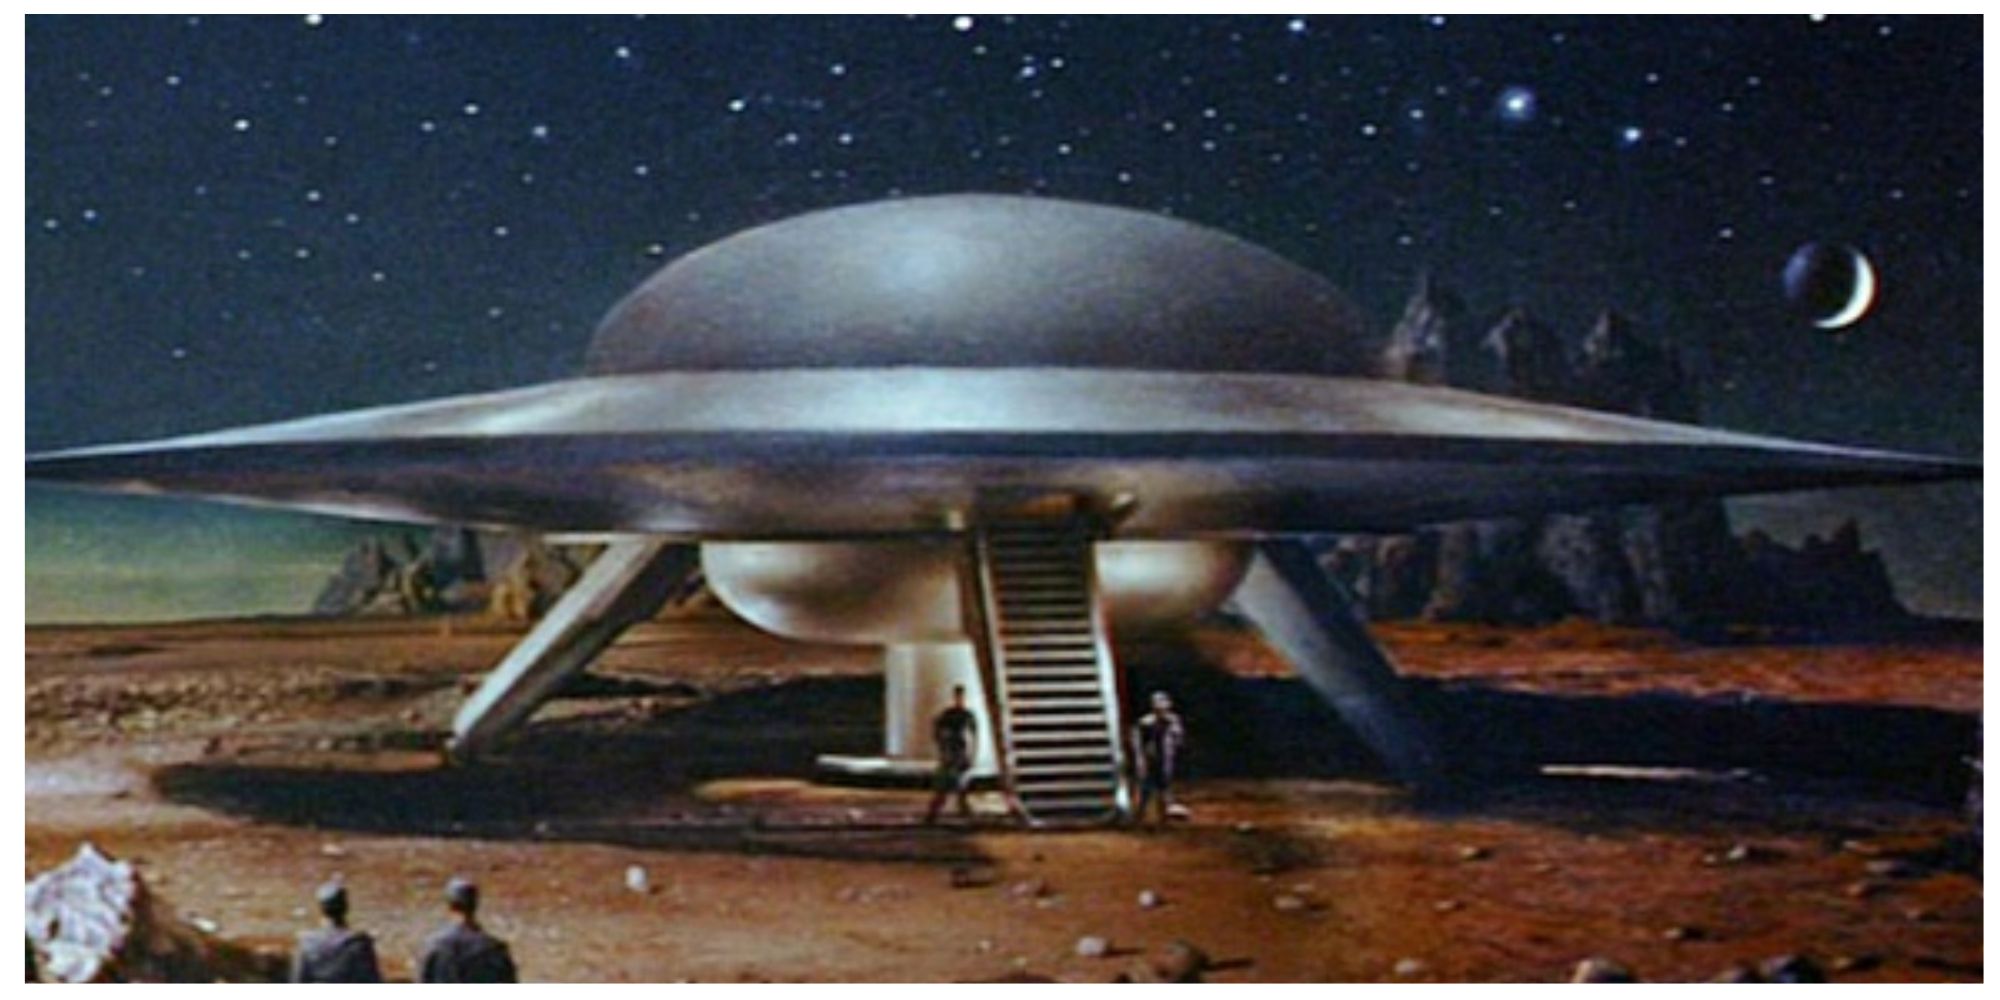 The spaceship from Forbidden Planet having landed on the landscape 